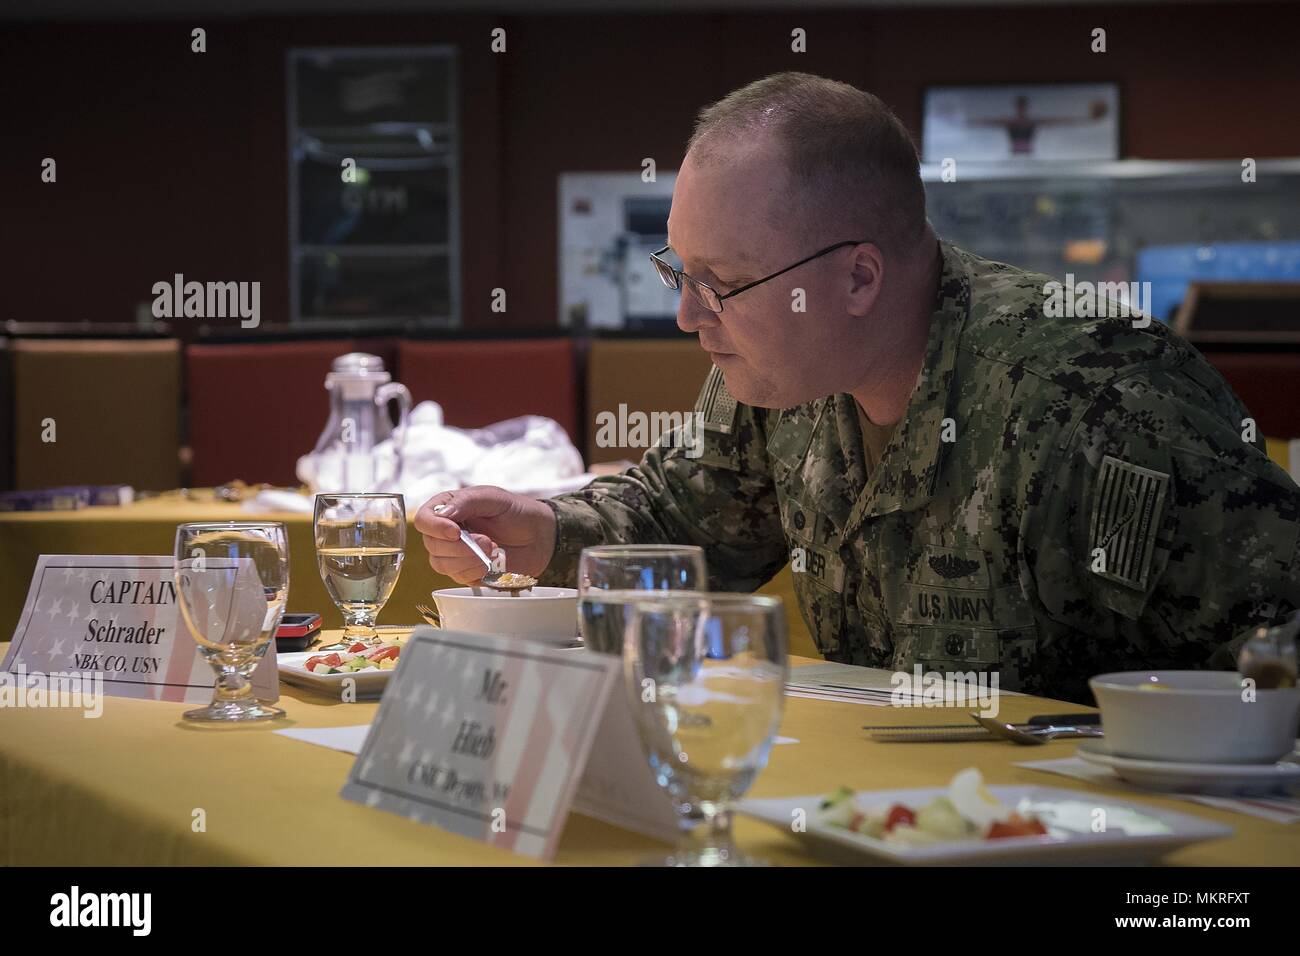 180505-N-EH218-0022 BREMERTON, Wash. (May 5, 2018) Capt. Alan Schrader, commanding officer, Naval Base Kitsap, samples an entry during the 26th Annual Armed Forces Culinary Arts Competition, May 5, 2018. Each year, service members from Naval Base Kitsap, Joint Base Lewis-McChord, Naval Station Everett, Naval Air Station Whidbey Island and other commands throughout the Pacific Northwest come together to compete in a battle of culinary ability for the title of 'Iron Chef. ' (U.S. Navy photo by Mass Communication Specialist 2nd Class Ryan J. Batchelder/Released). () Stock Photo